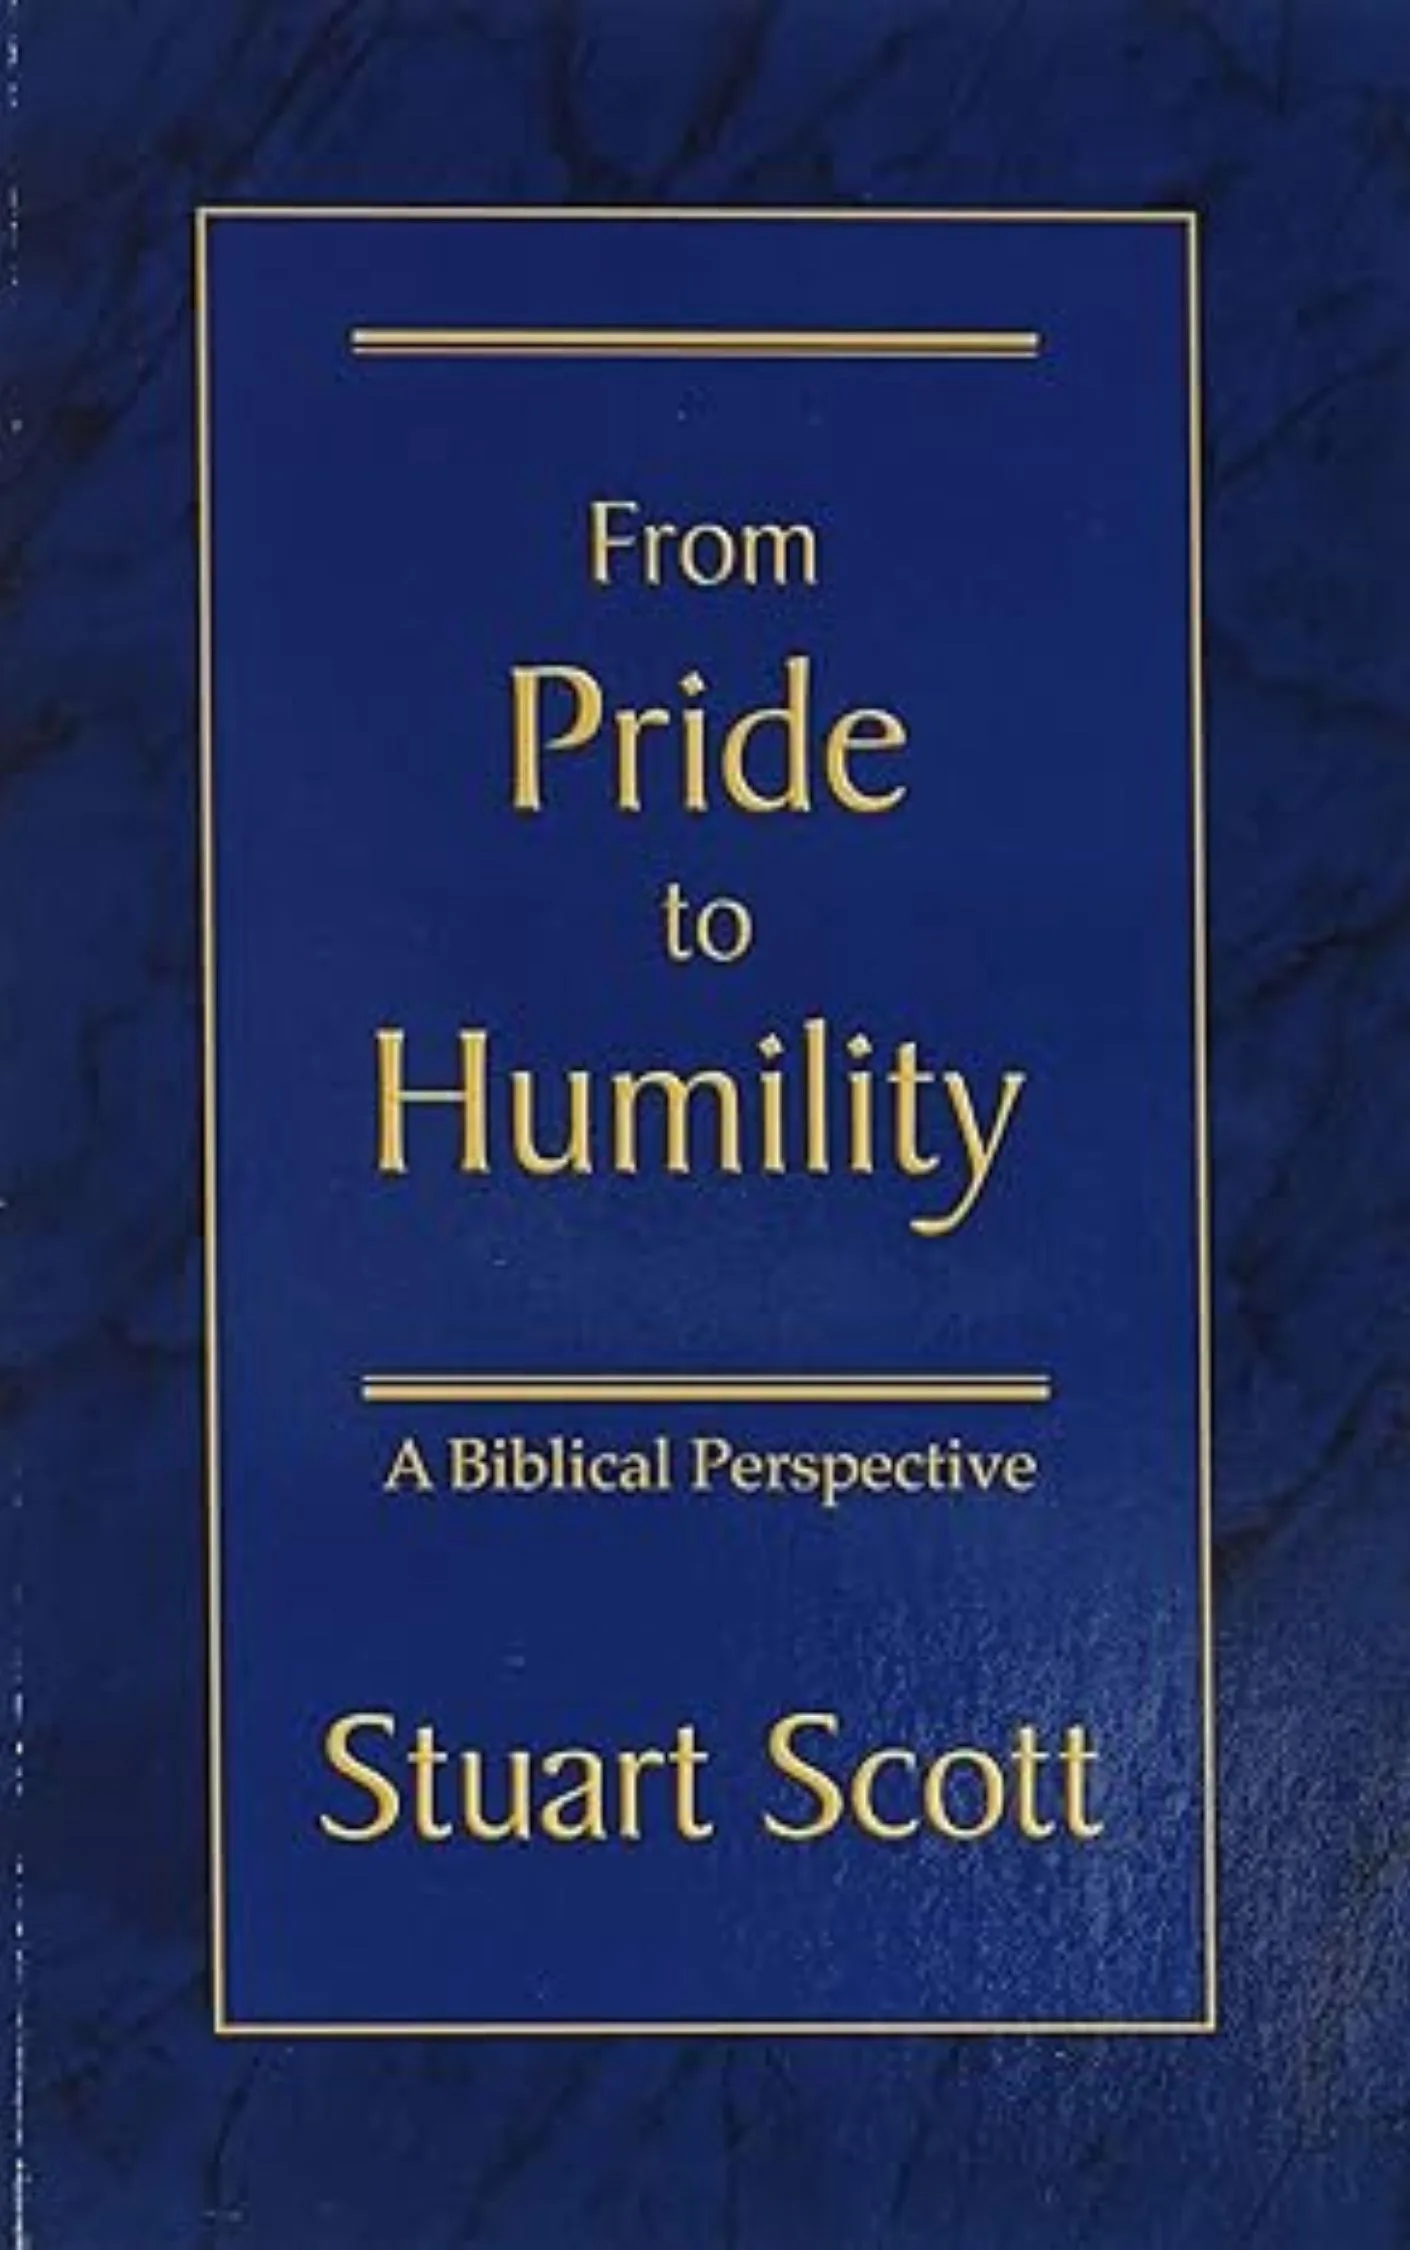 From Pride to Humility: A Biblical Perspective by Stuart Scott